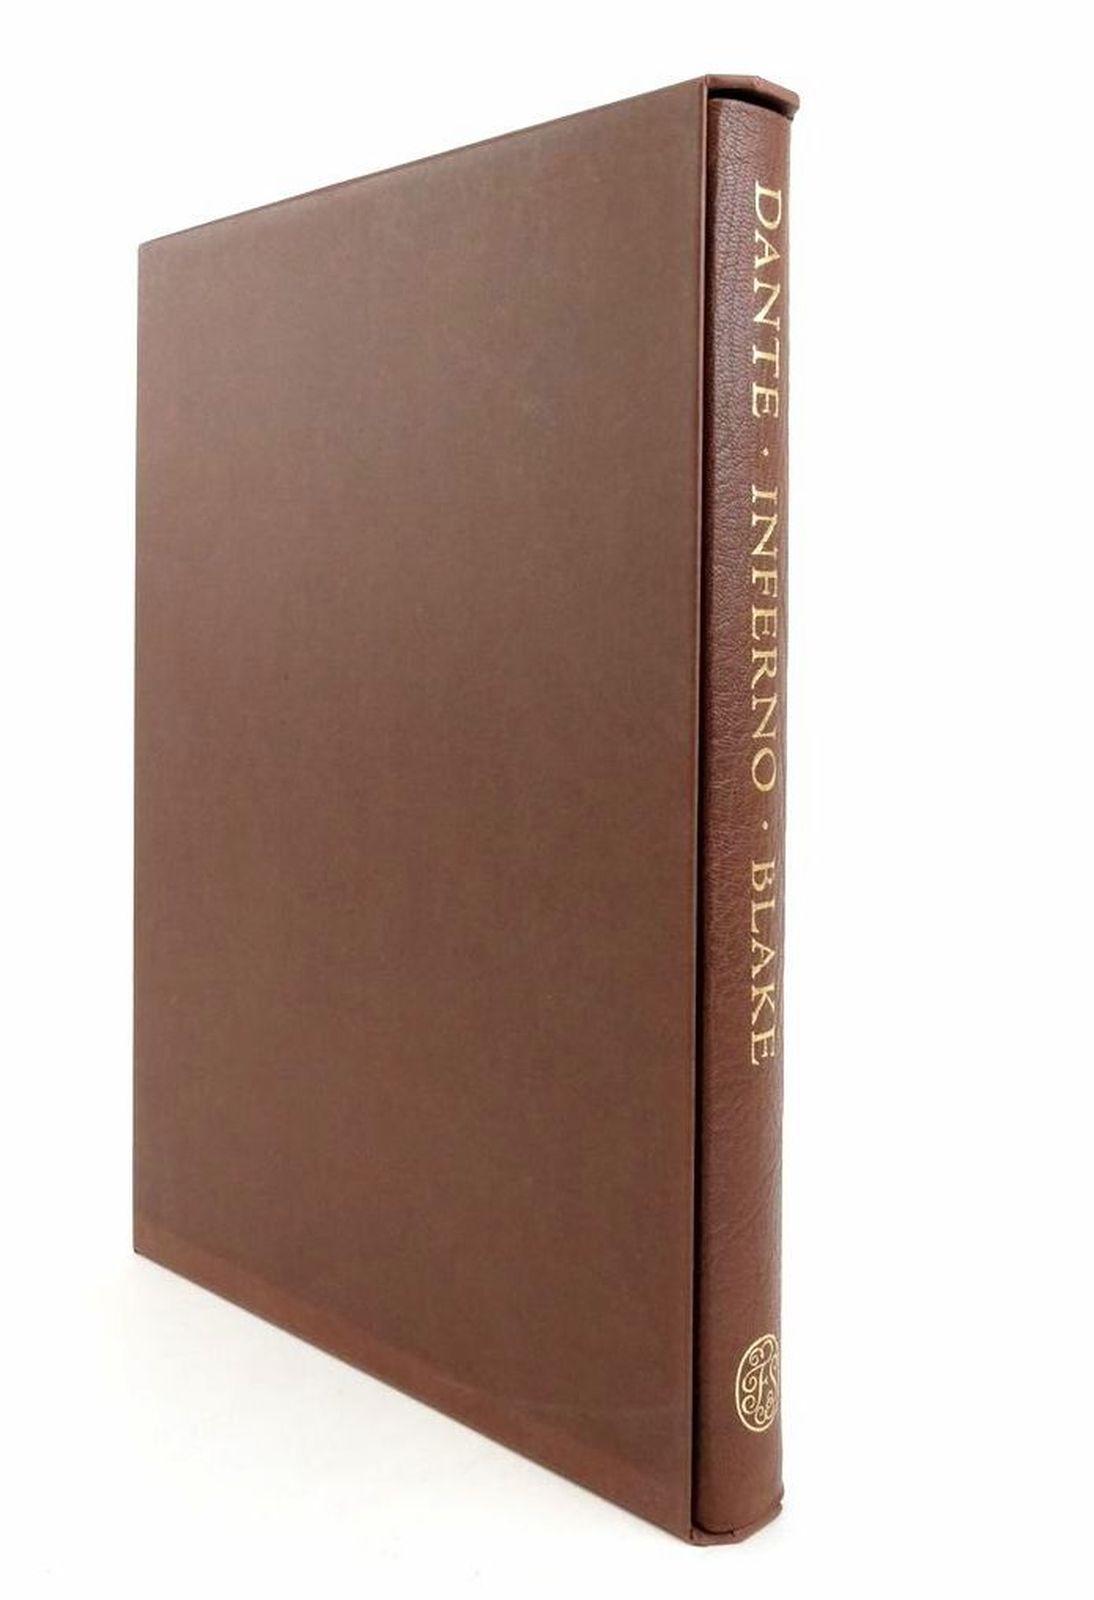 Photo of INFERNO written by Alighieri, Dante
Cary, Henry Francis
Hamlyn, Robin illustrated by Blake, William published by Folio Society (STOCK CODE: 1823016)  for sale by Stella & Rose's Books